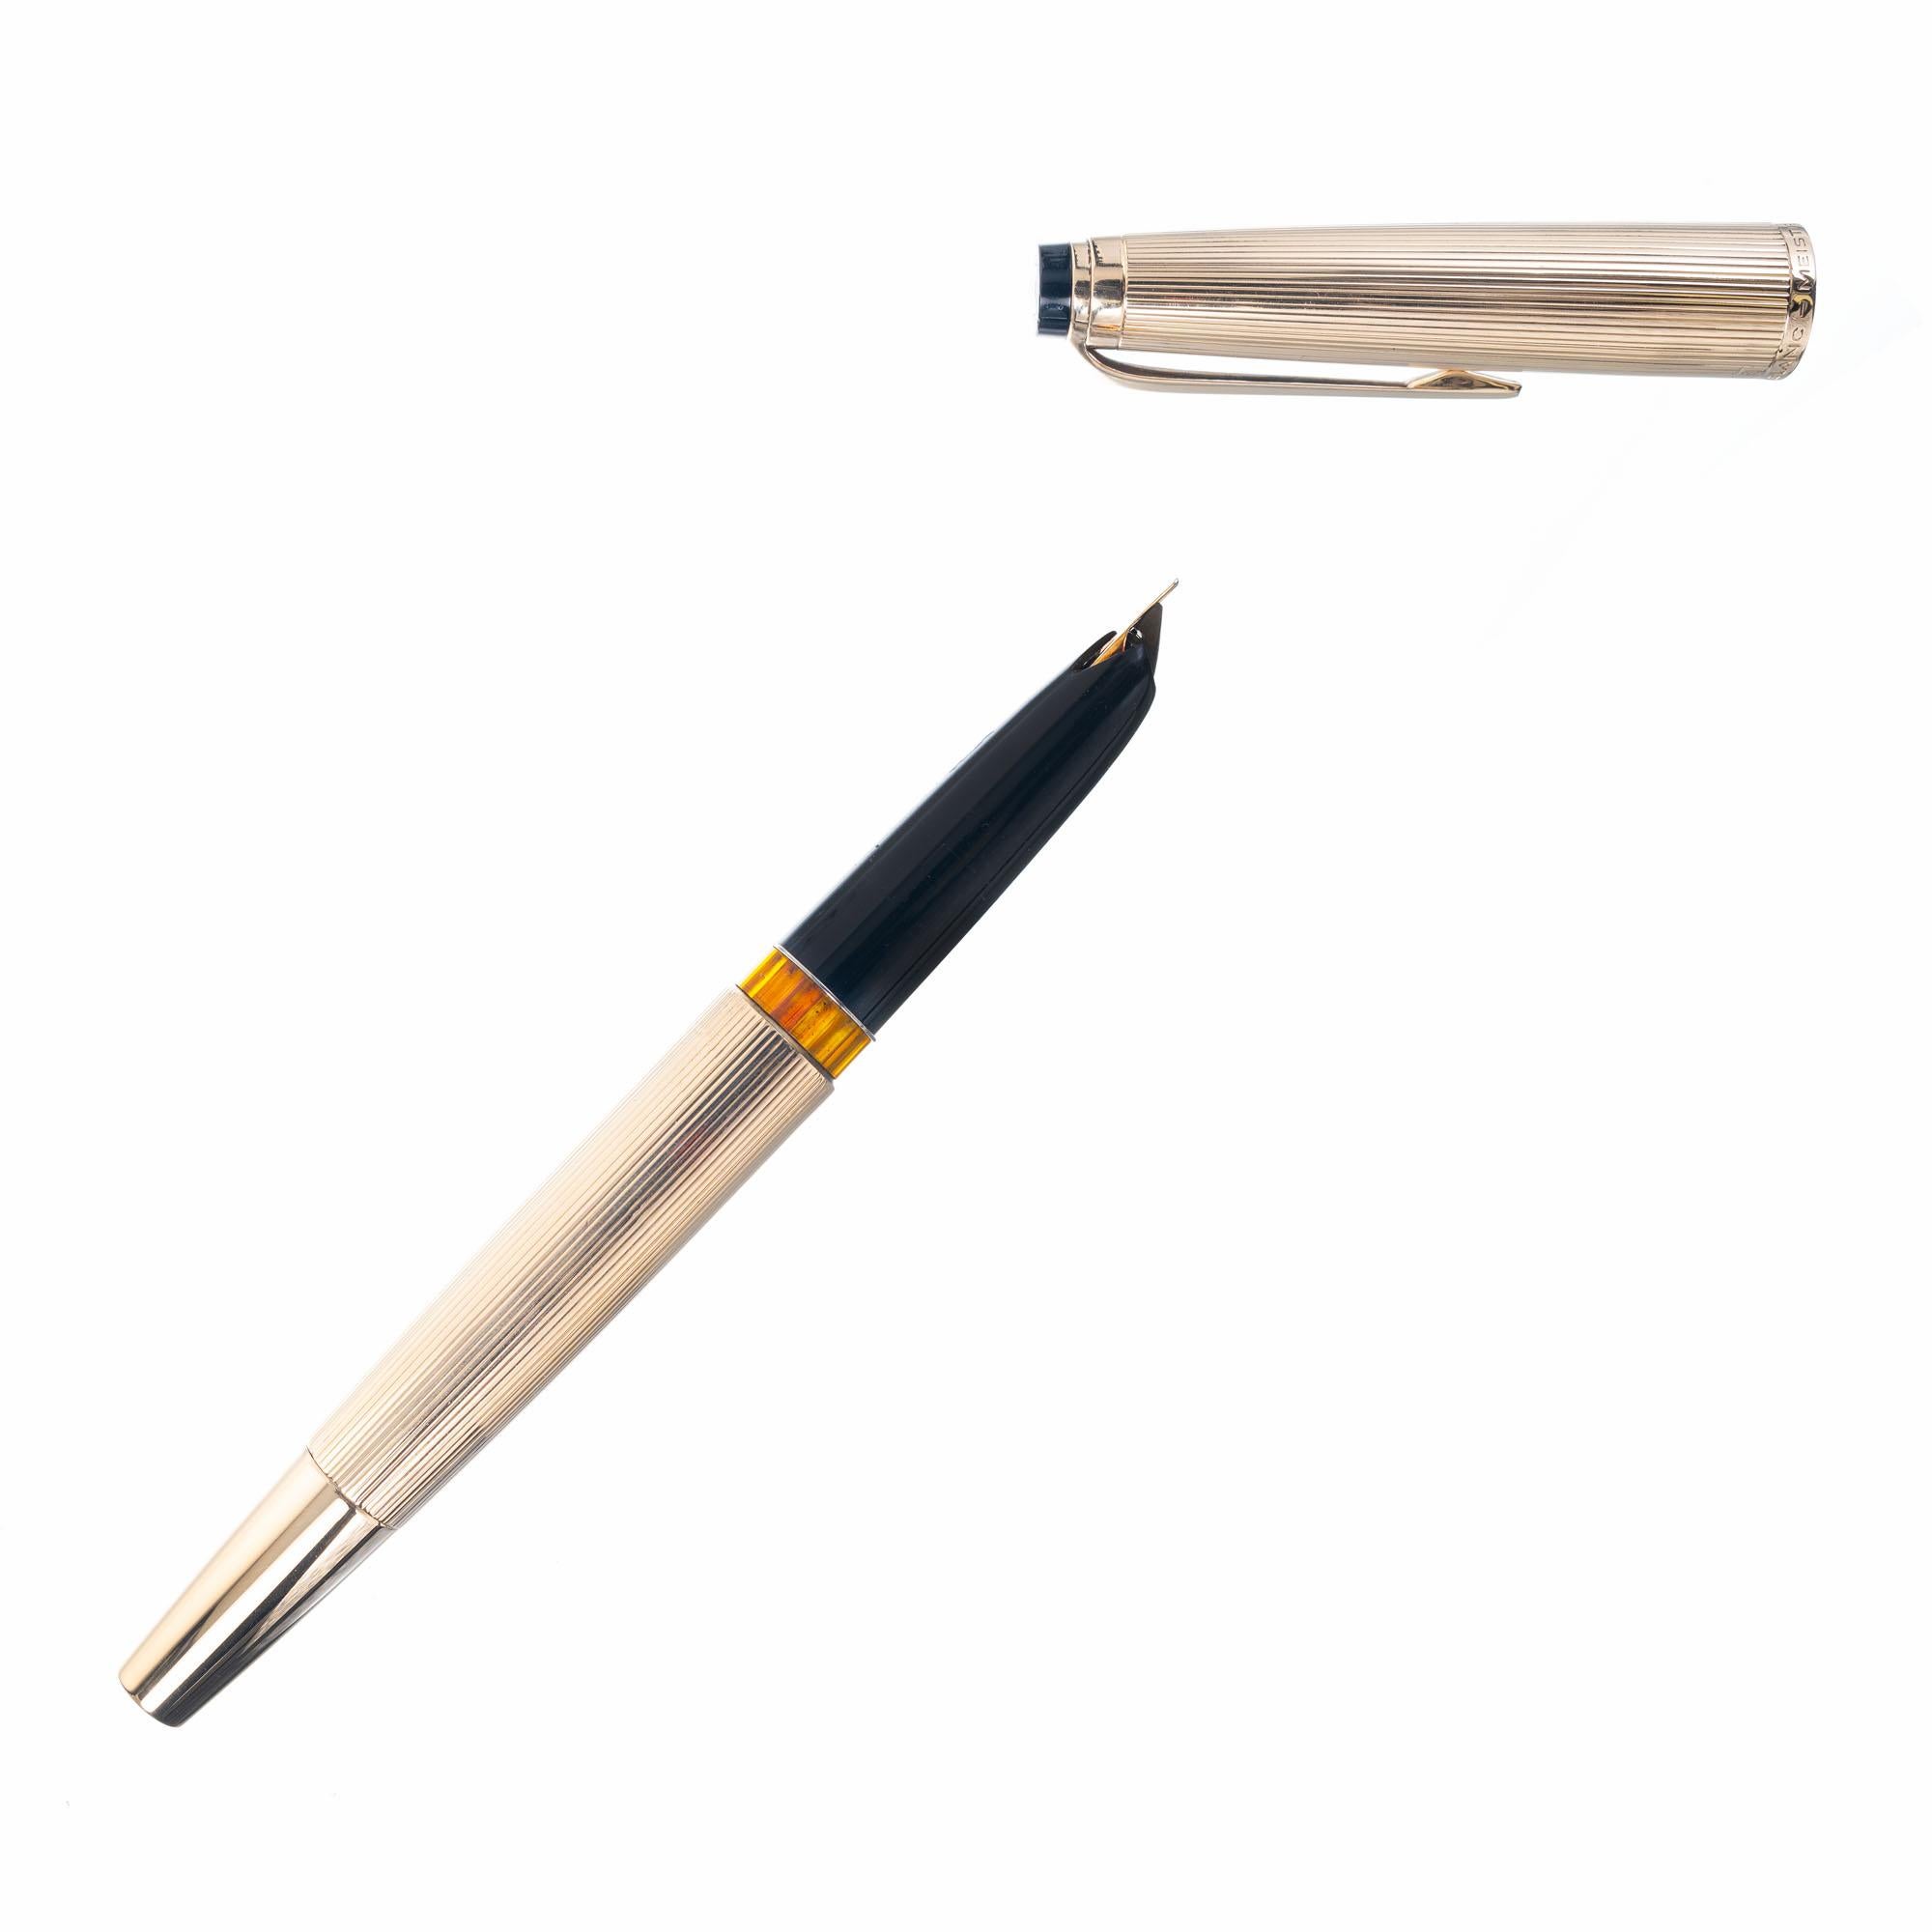 Monteblanc Meisterstück #94 solid 14k fountain pen with solid Monteblanc solid gold nib. Piston type. Pen and cap both stamped 585 for 14k yellow gold. Comes with a new bottle of Montblanc mystery black Ink.

14k yellow  Gold
Stamped: 585
Hallmark: